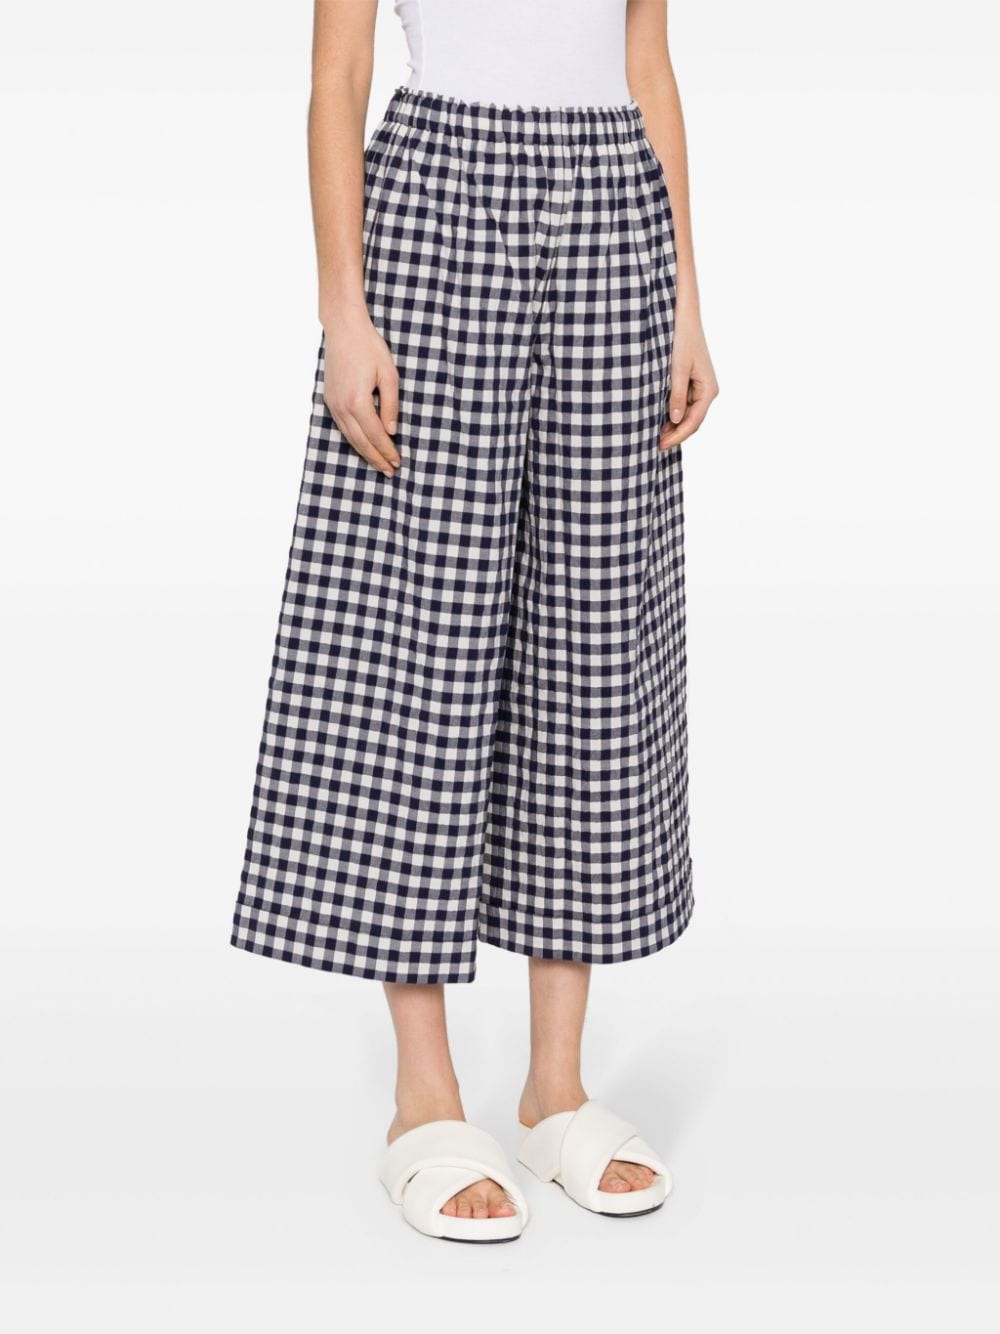 Shop Daniela Gregis Women's Checkered Cotton Trousers | Blue Gingham Pattern, High-waisted, Wide Leg In Navy